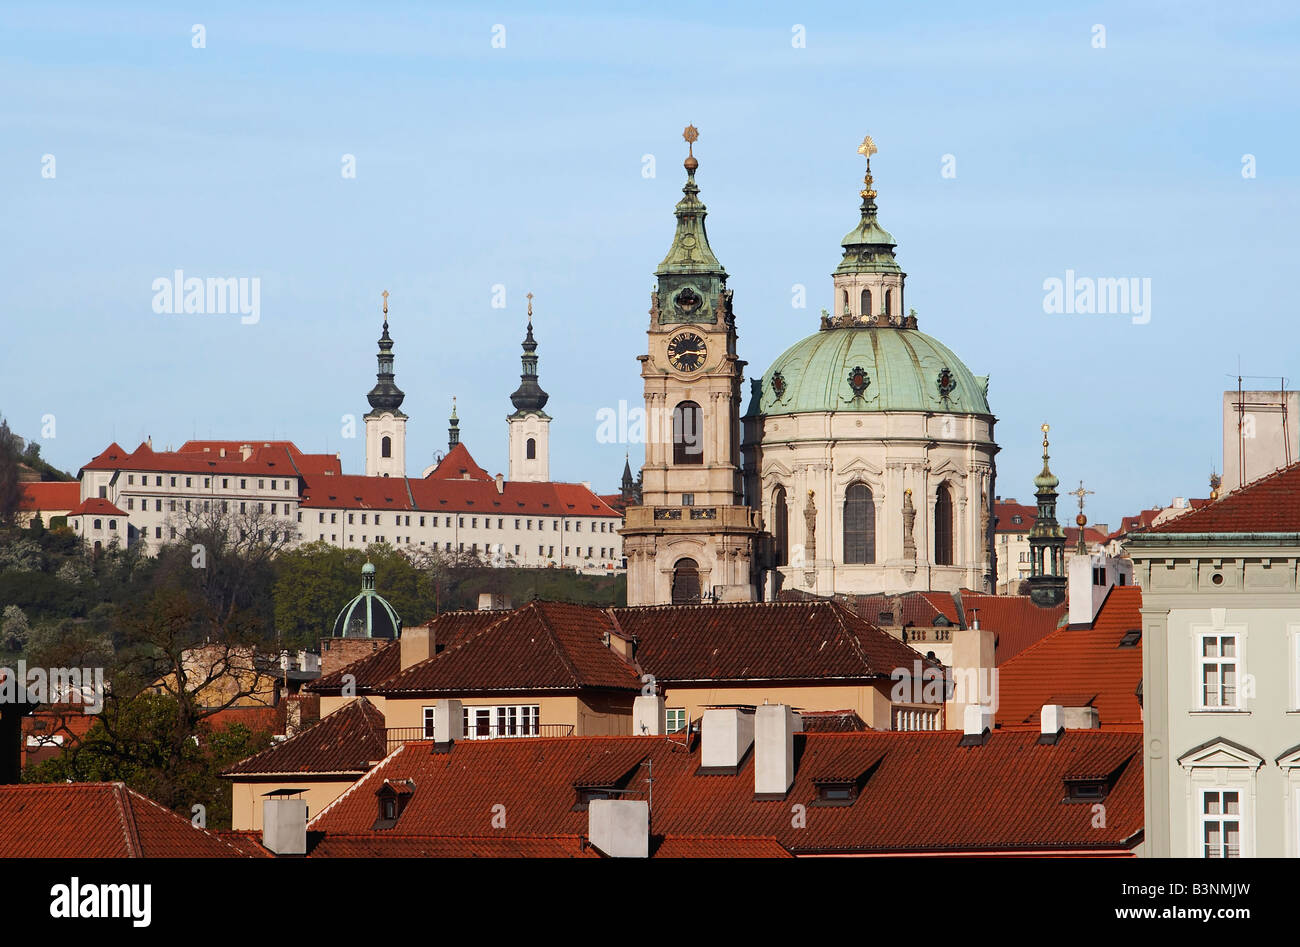 St Nikolas church - one of the most important buildings of baroque Prague with a dominant dome and belfry Stock Photo